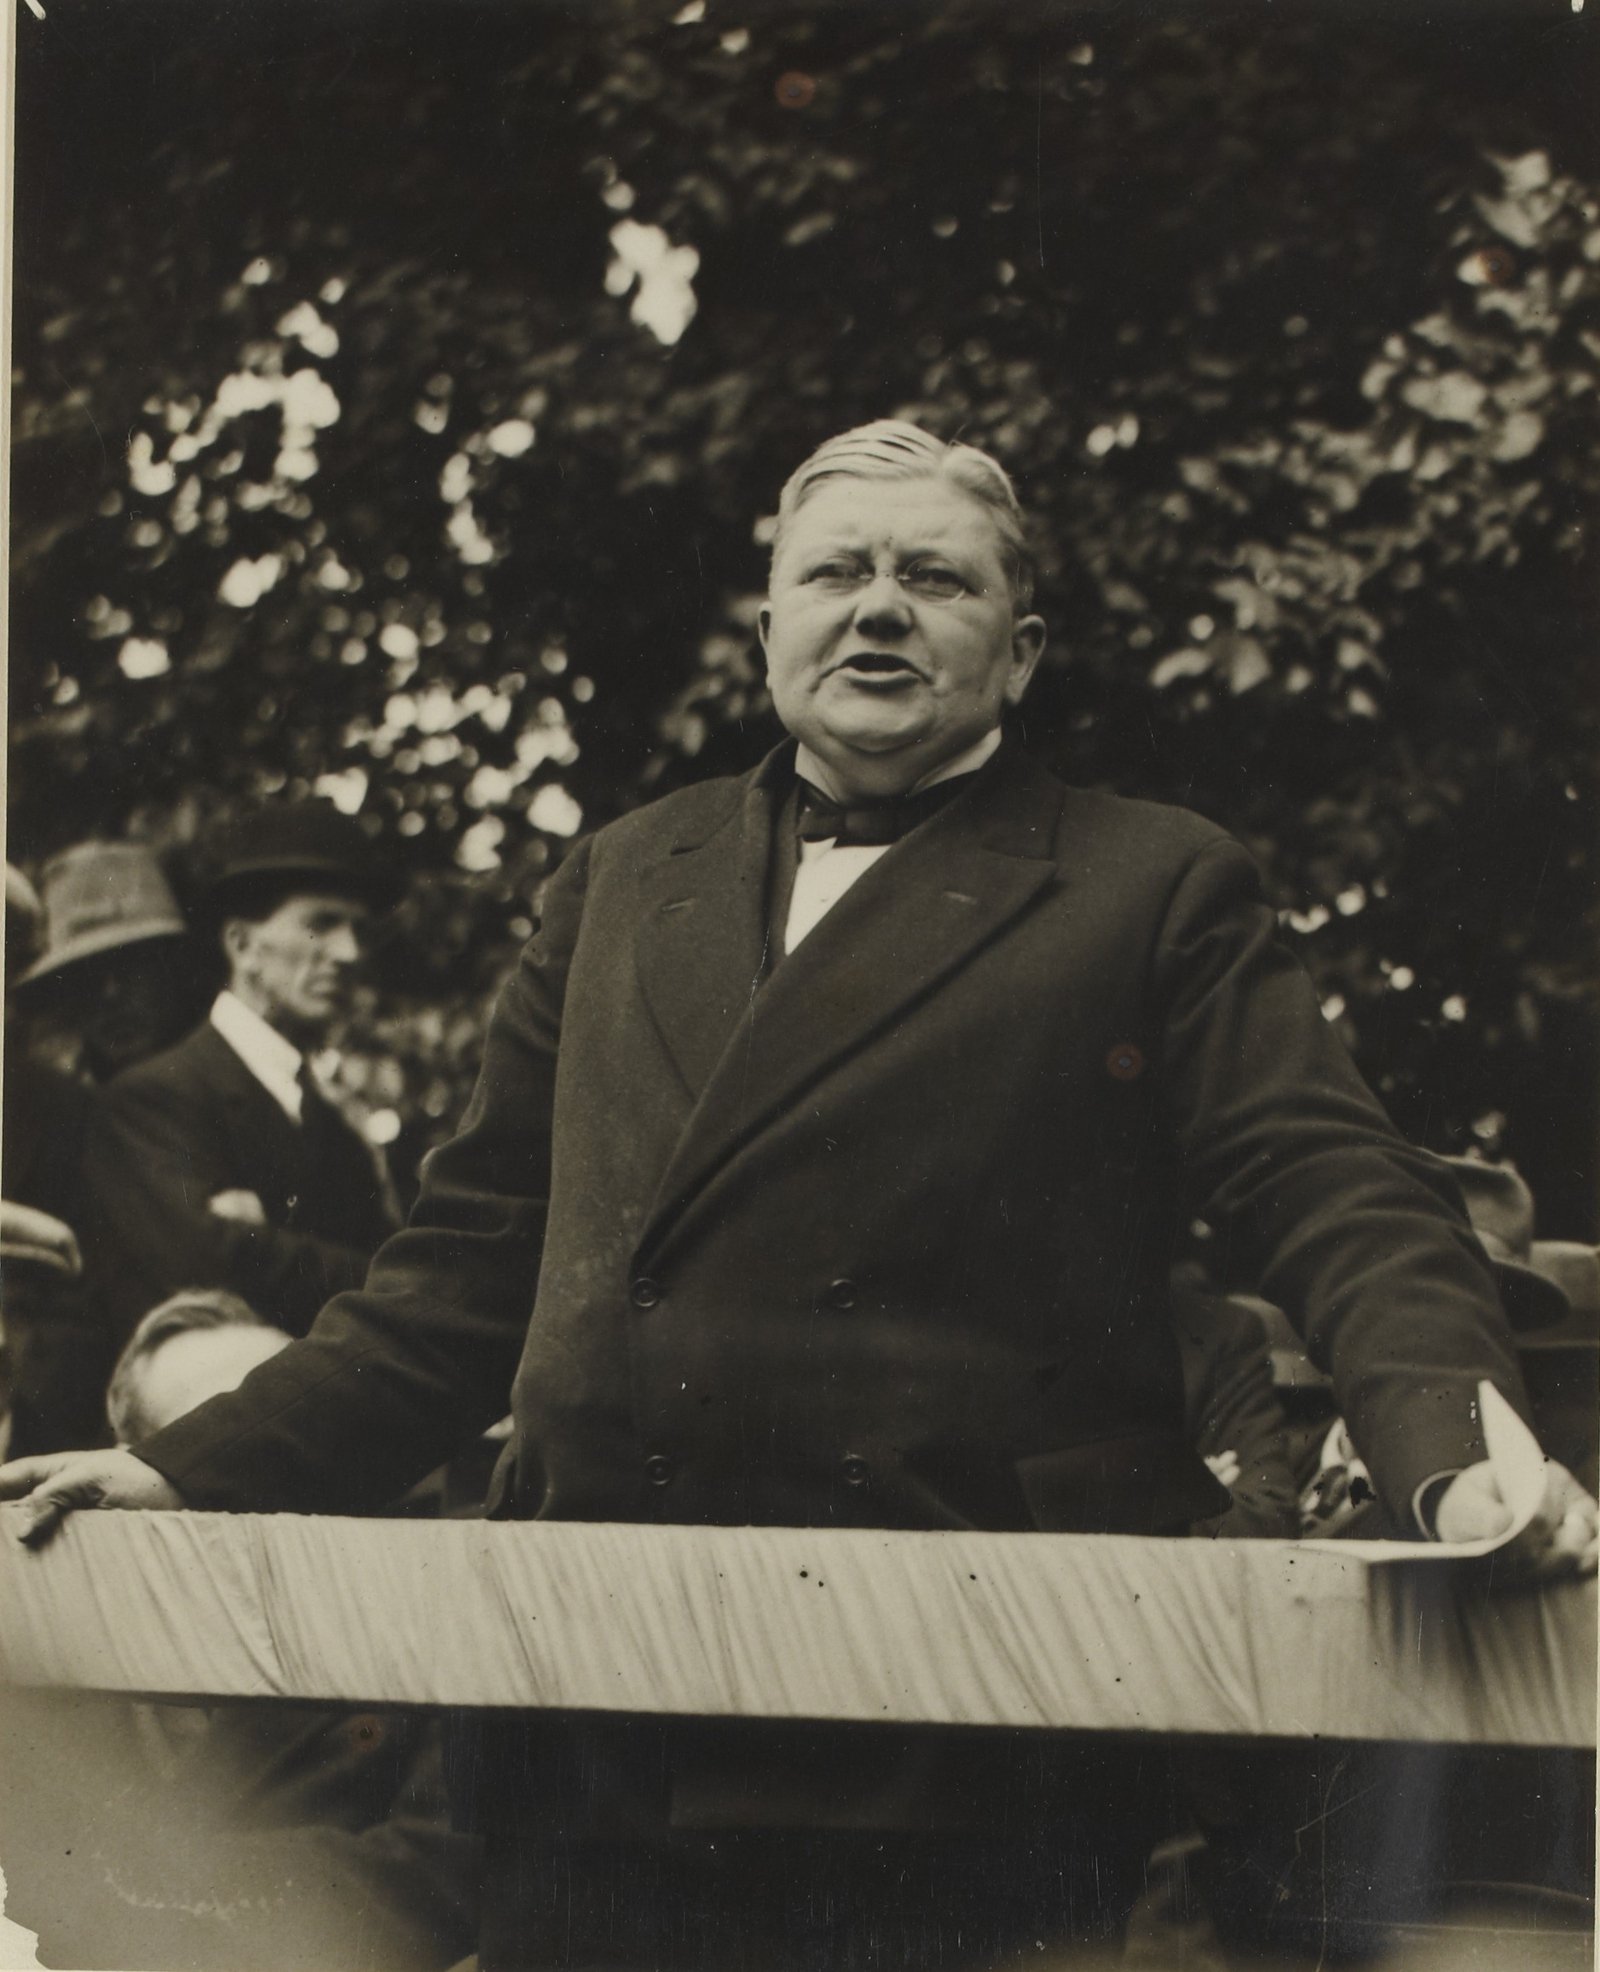 Image - Attorney-General Hugh Kennedy. Credit: National Library of Ireland.